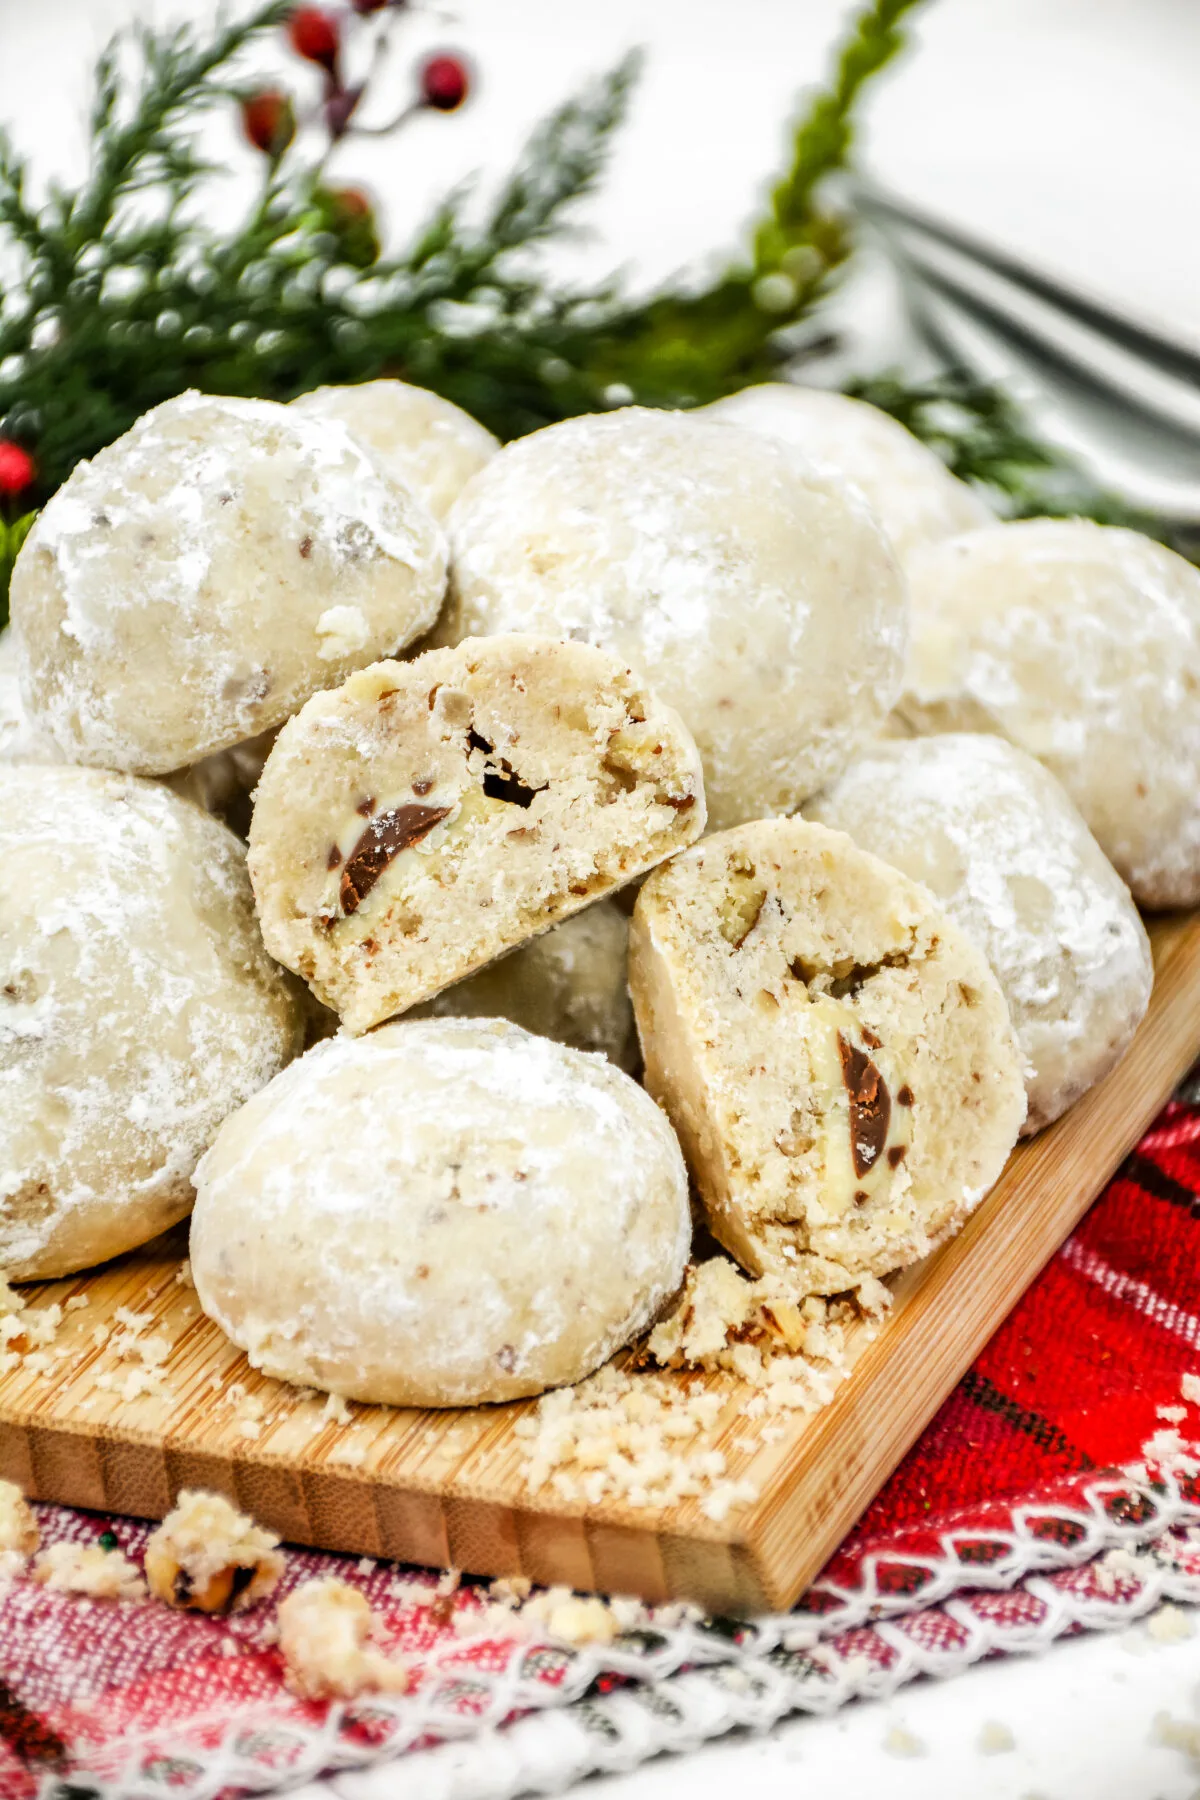 These chocolate kiss snowball cookies are a festive holiday treat. Easy to make, they're perfect for cookie exchanges and gift giving too.